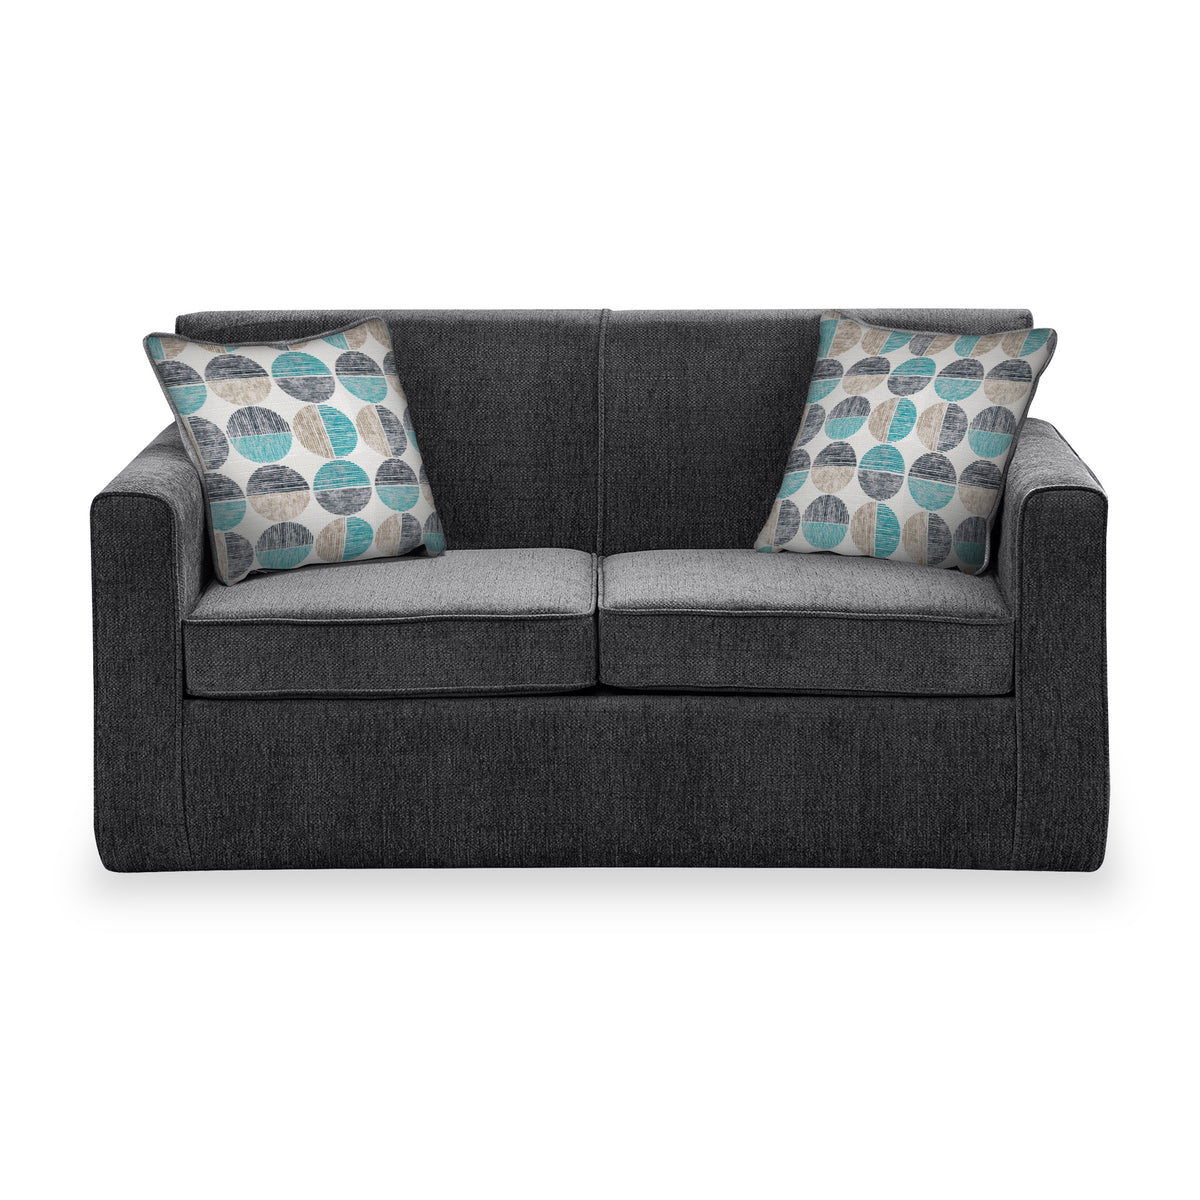 Bawtry Charcoal Faux Linen 2 Seater Sofabed with Duck Egg Scatter Cushions from Roseland Furniture